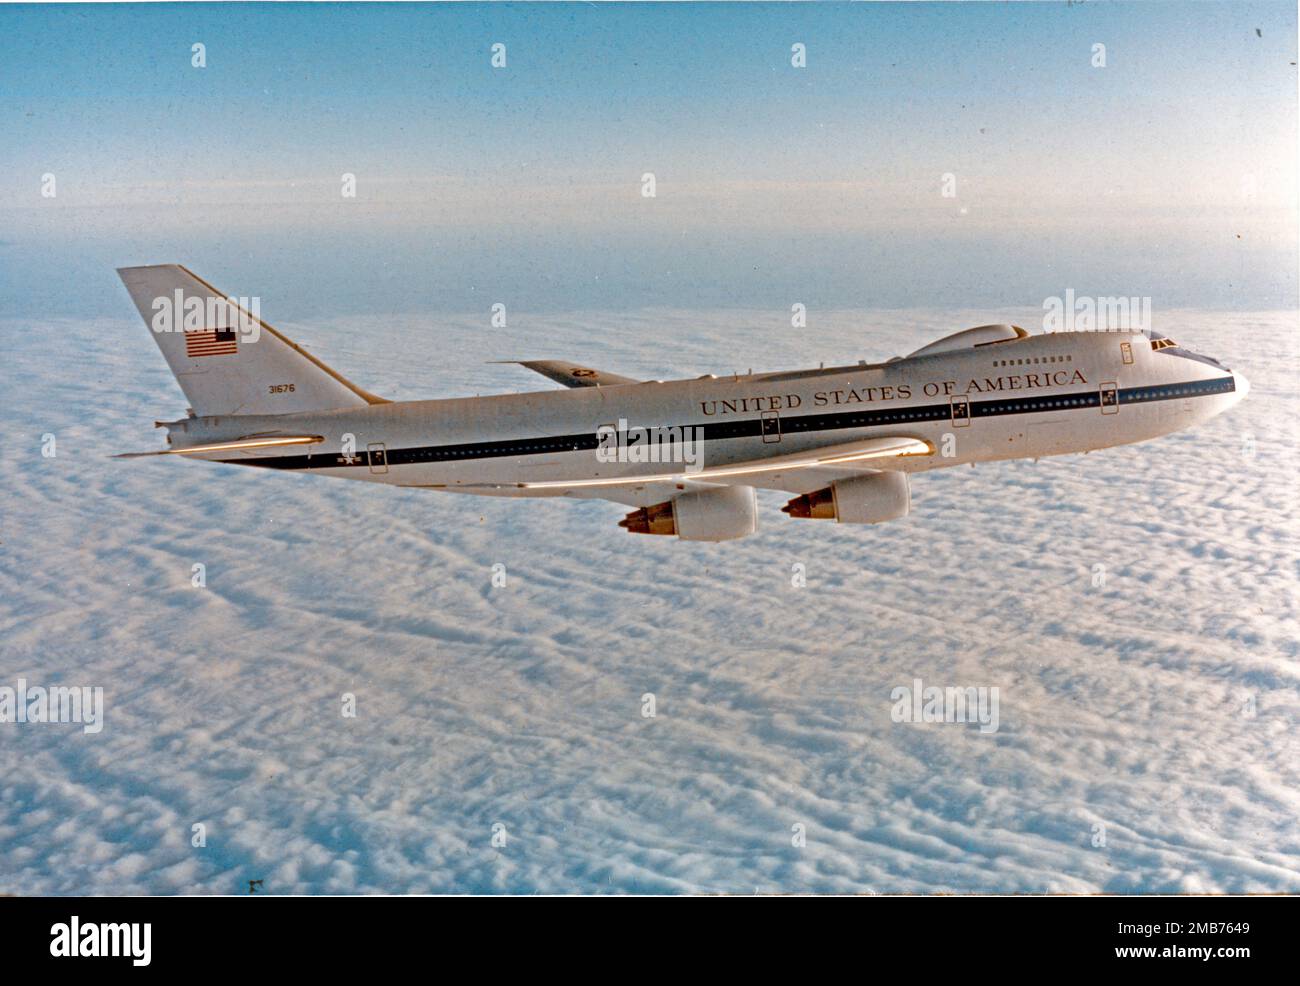 An E4B (NEACP) National Emergency Airborne Command Post, based at 595th Command and Control Group at Offutt Air Force Base, Nebraska, in flight over clouds on March 26, 1985. The E-4B is a militarized version of the Boeing 747-200, a four-engine, swept-wing, long-range high-altitude airplane capable of refueling in flight. In case of national emergency or destruction of ground command and control centers, the aircraft provides a highly survivable command, control and communications center to direct United States forces, execute emergency war orders and coordinate actions by civil authorities. Stock Photo